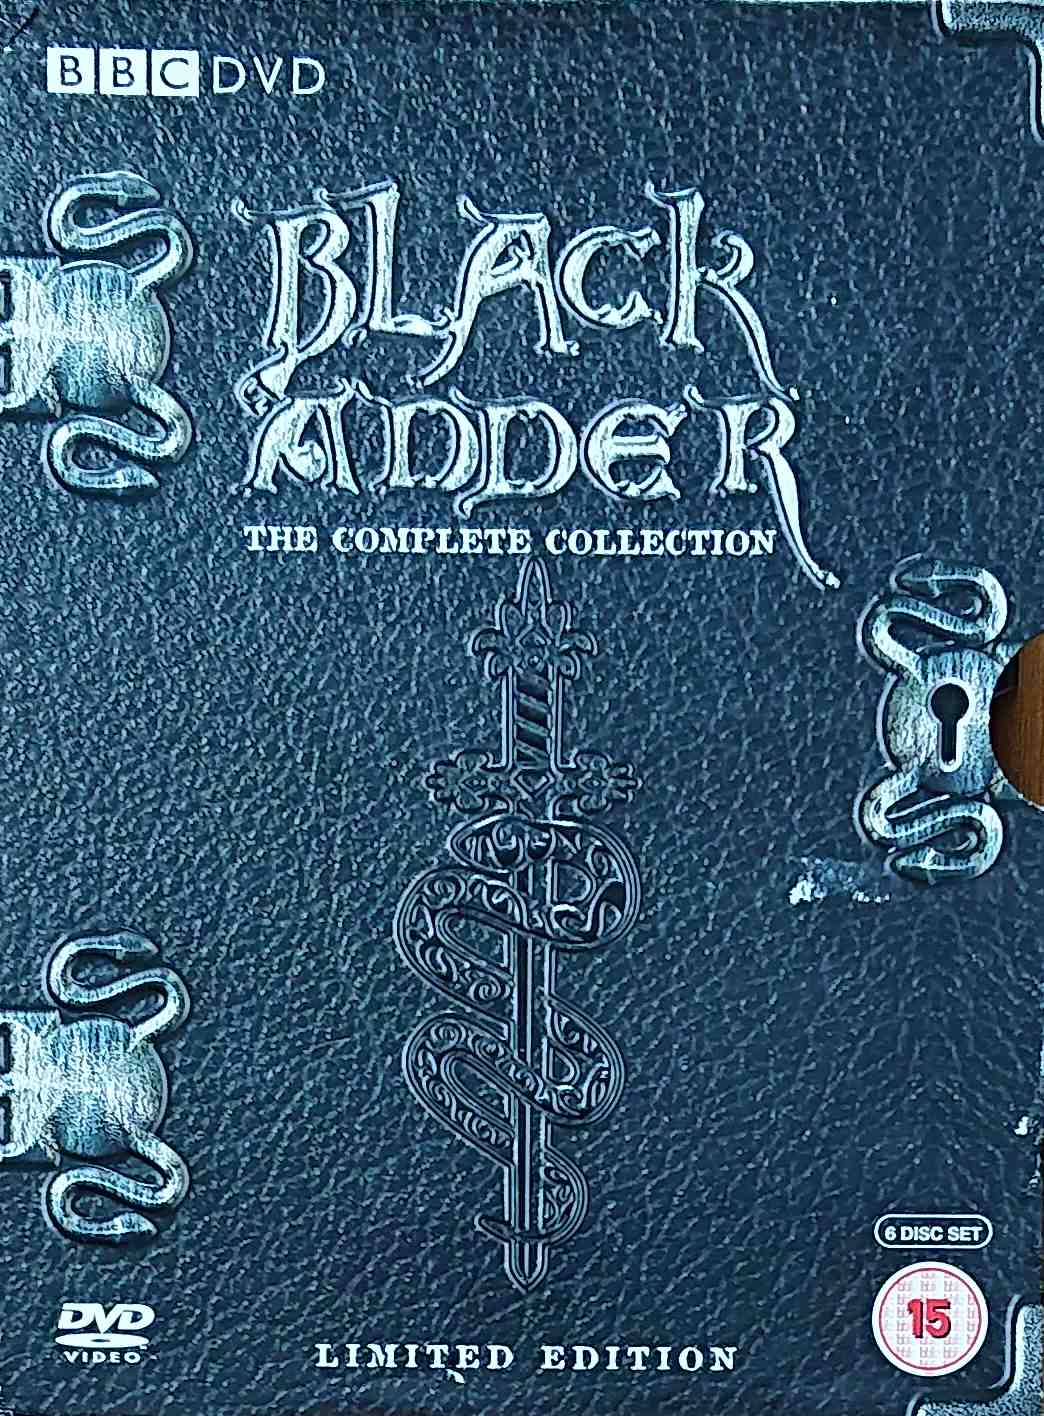 Picture of Black Adder - The complete collection by artist Richard Curtis / Rowan Atkinson / Ben Elton from the BBC dvds - Records and Tapes library